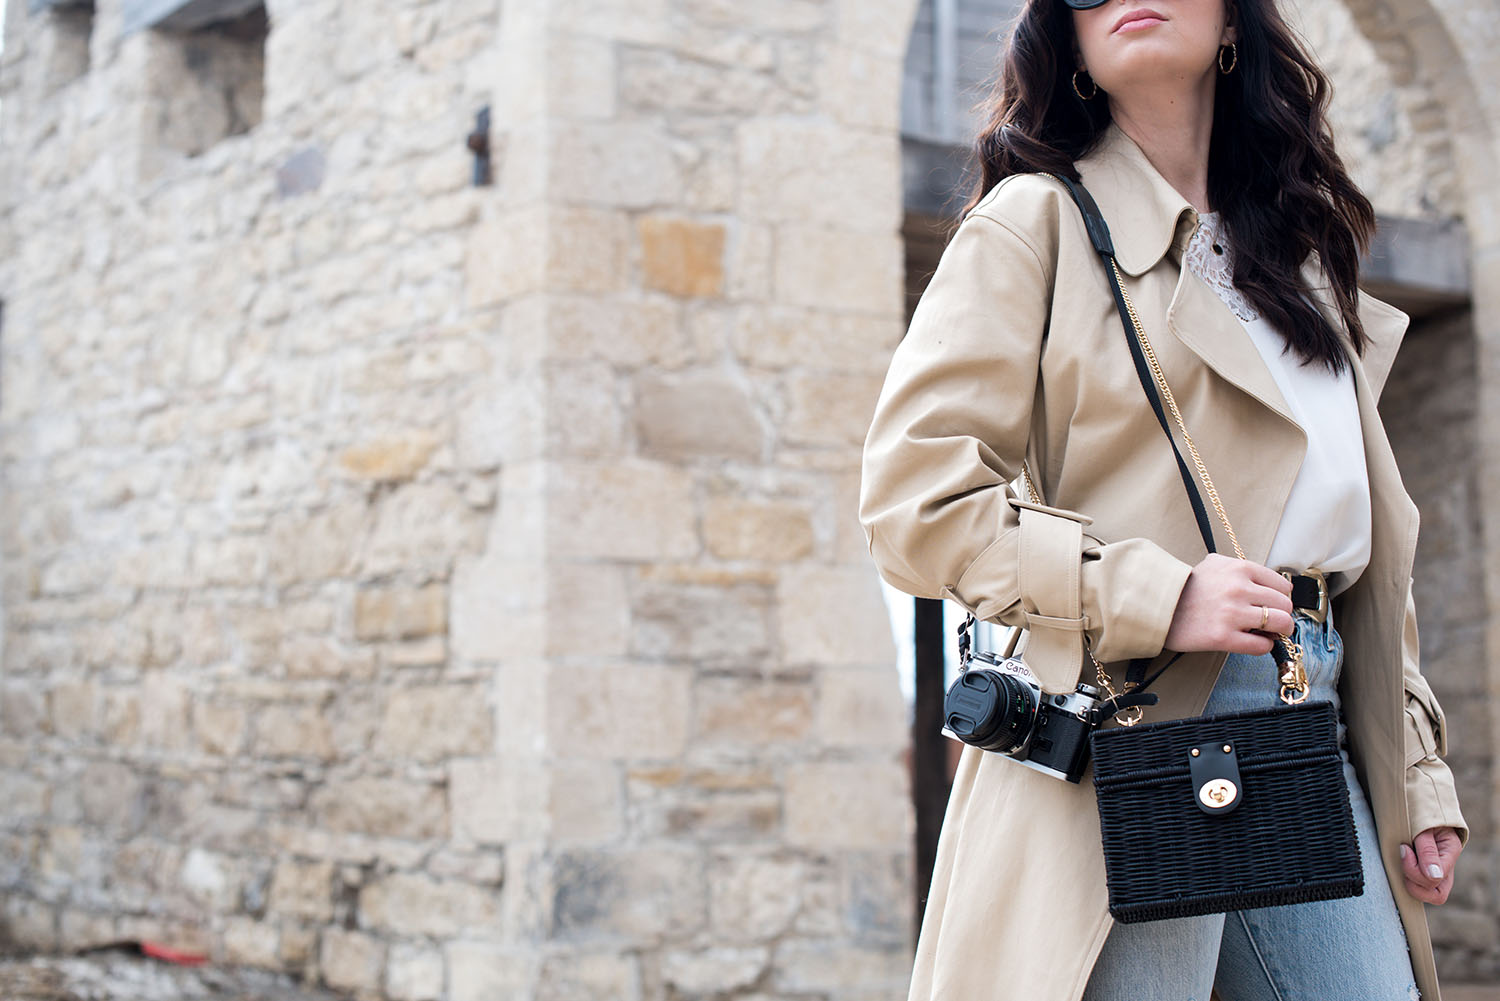 Outfit details on Canadian fashion blogger Cee Fardoe of Coco & Vera, including a Zara black straw bag and H&M trench coat